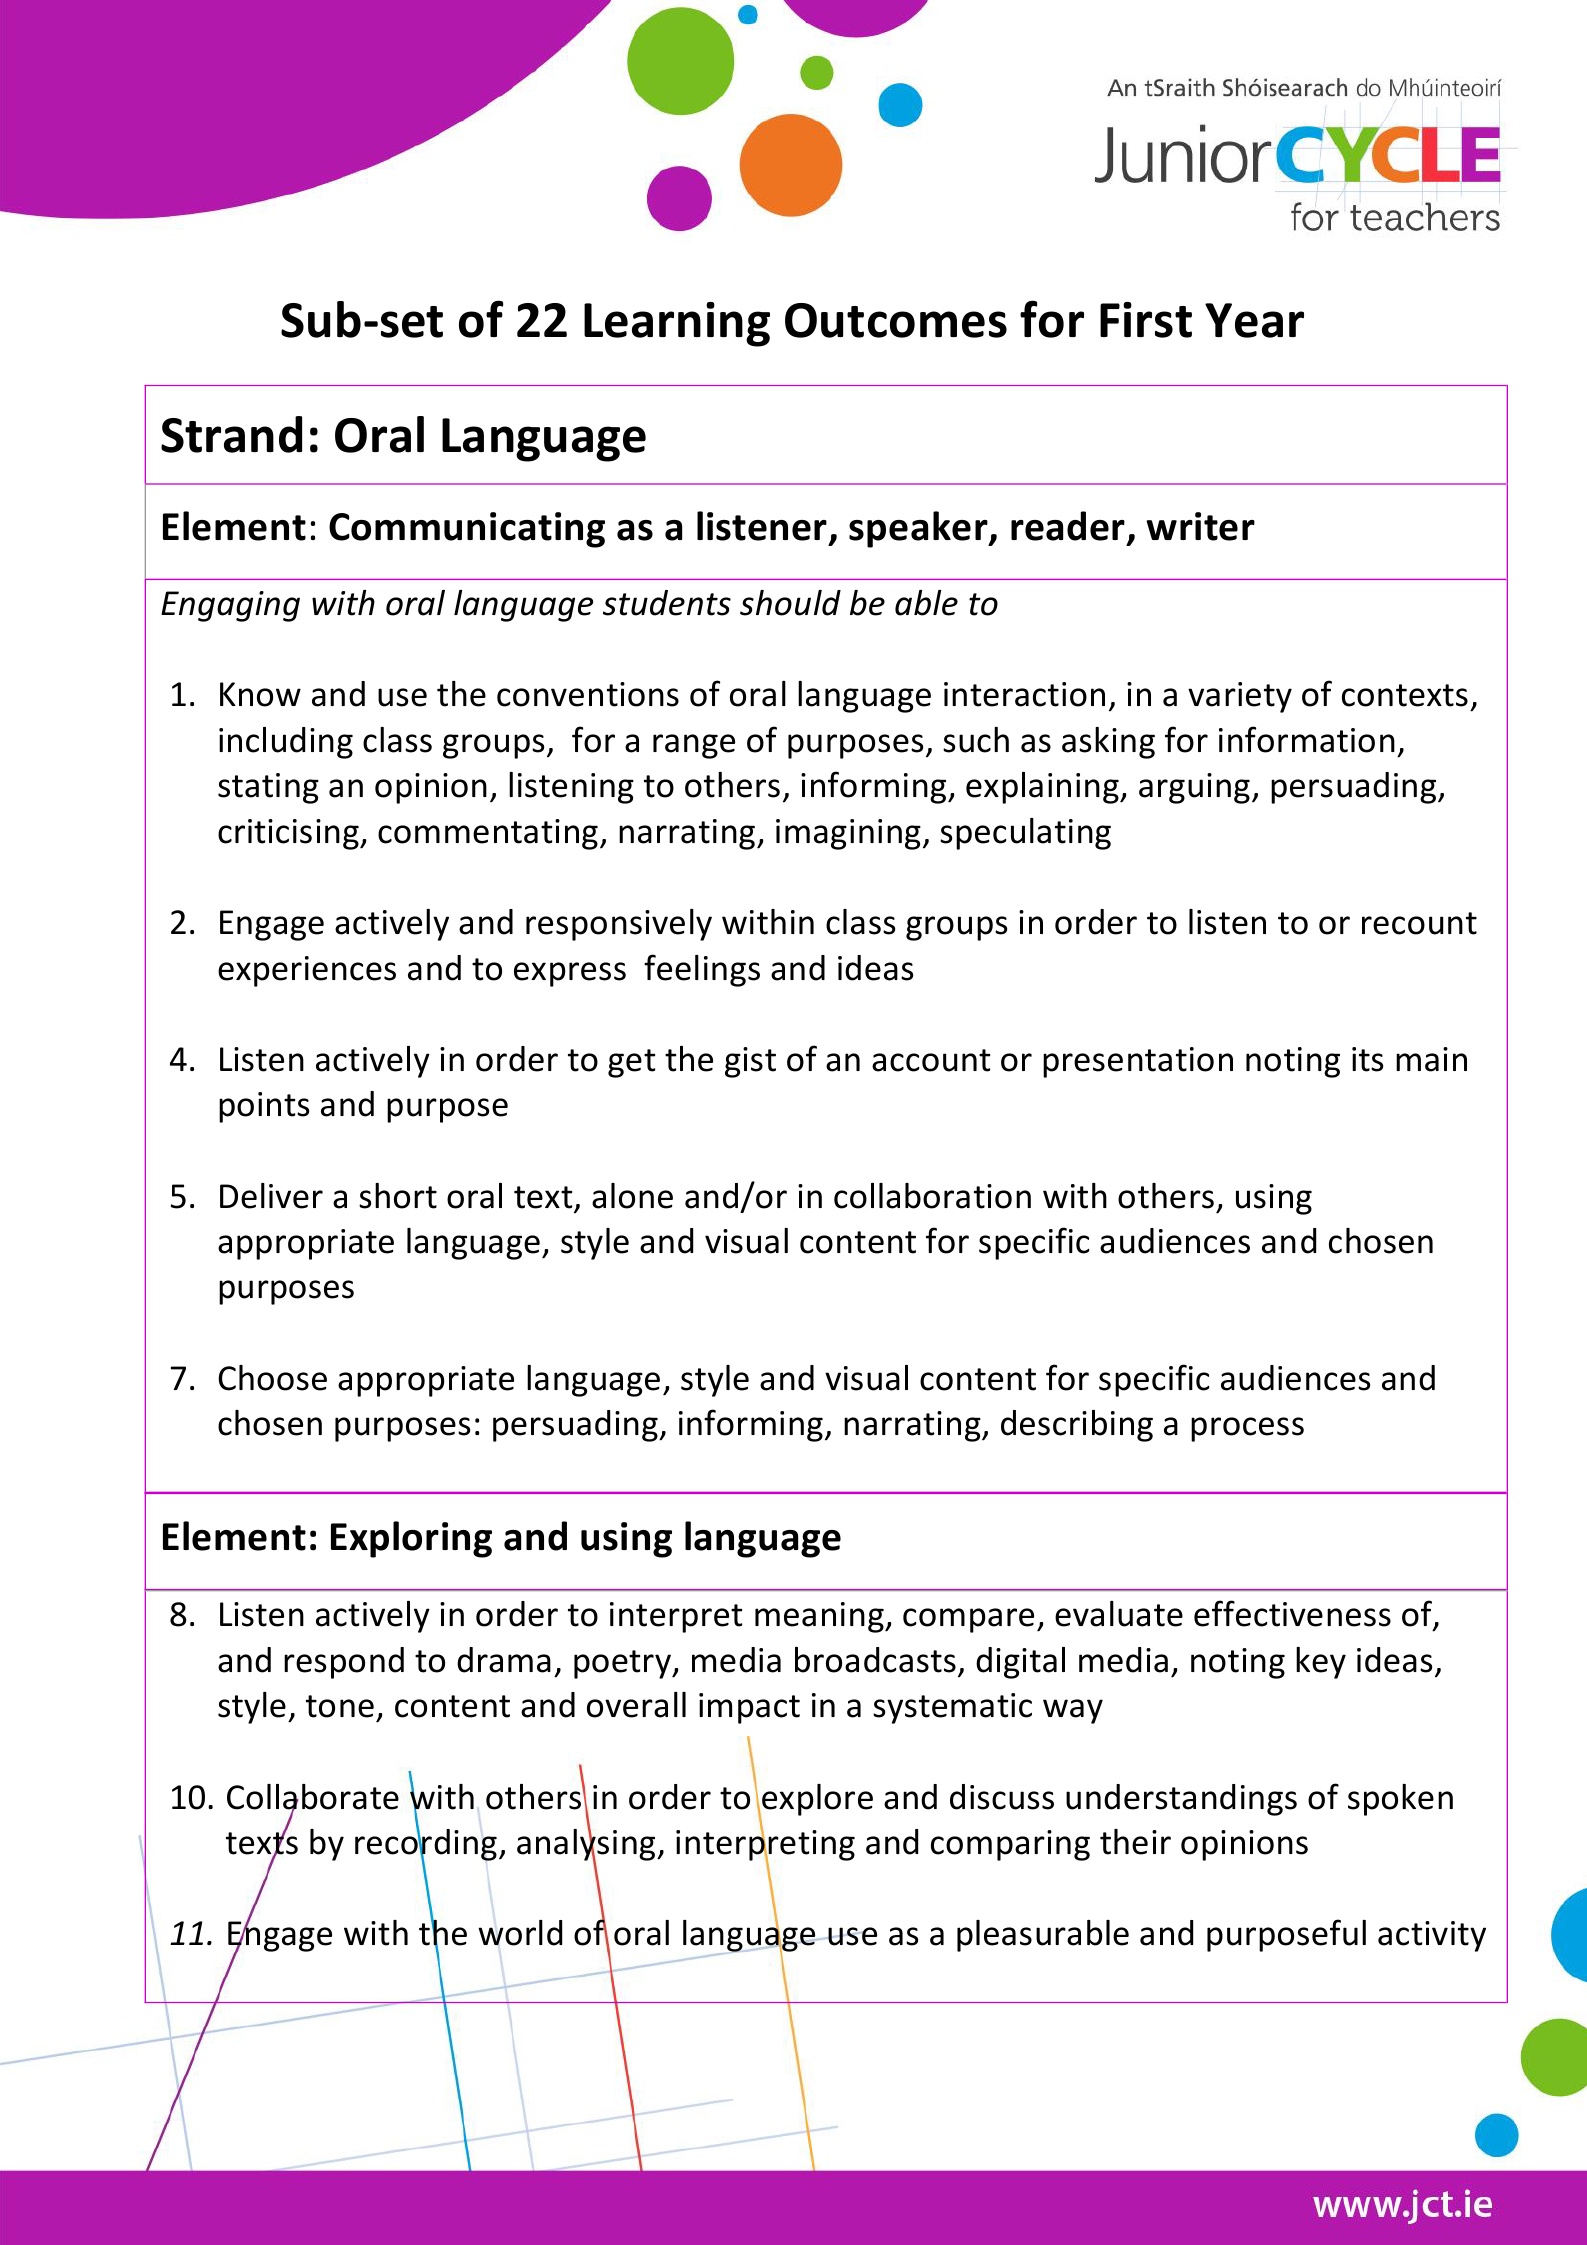 Sub set of 22 Learning Outcomes for 1st year English 2016